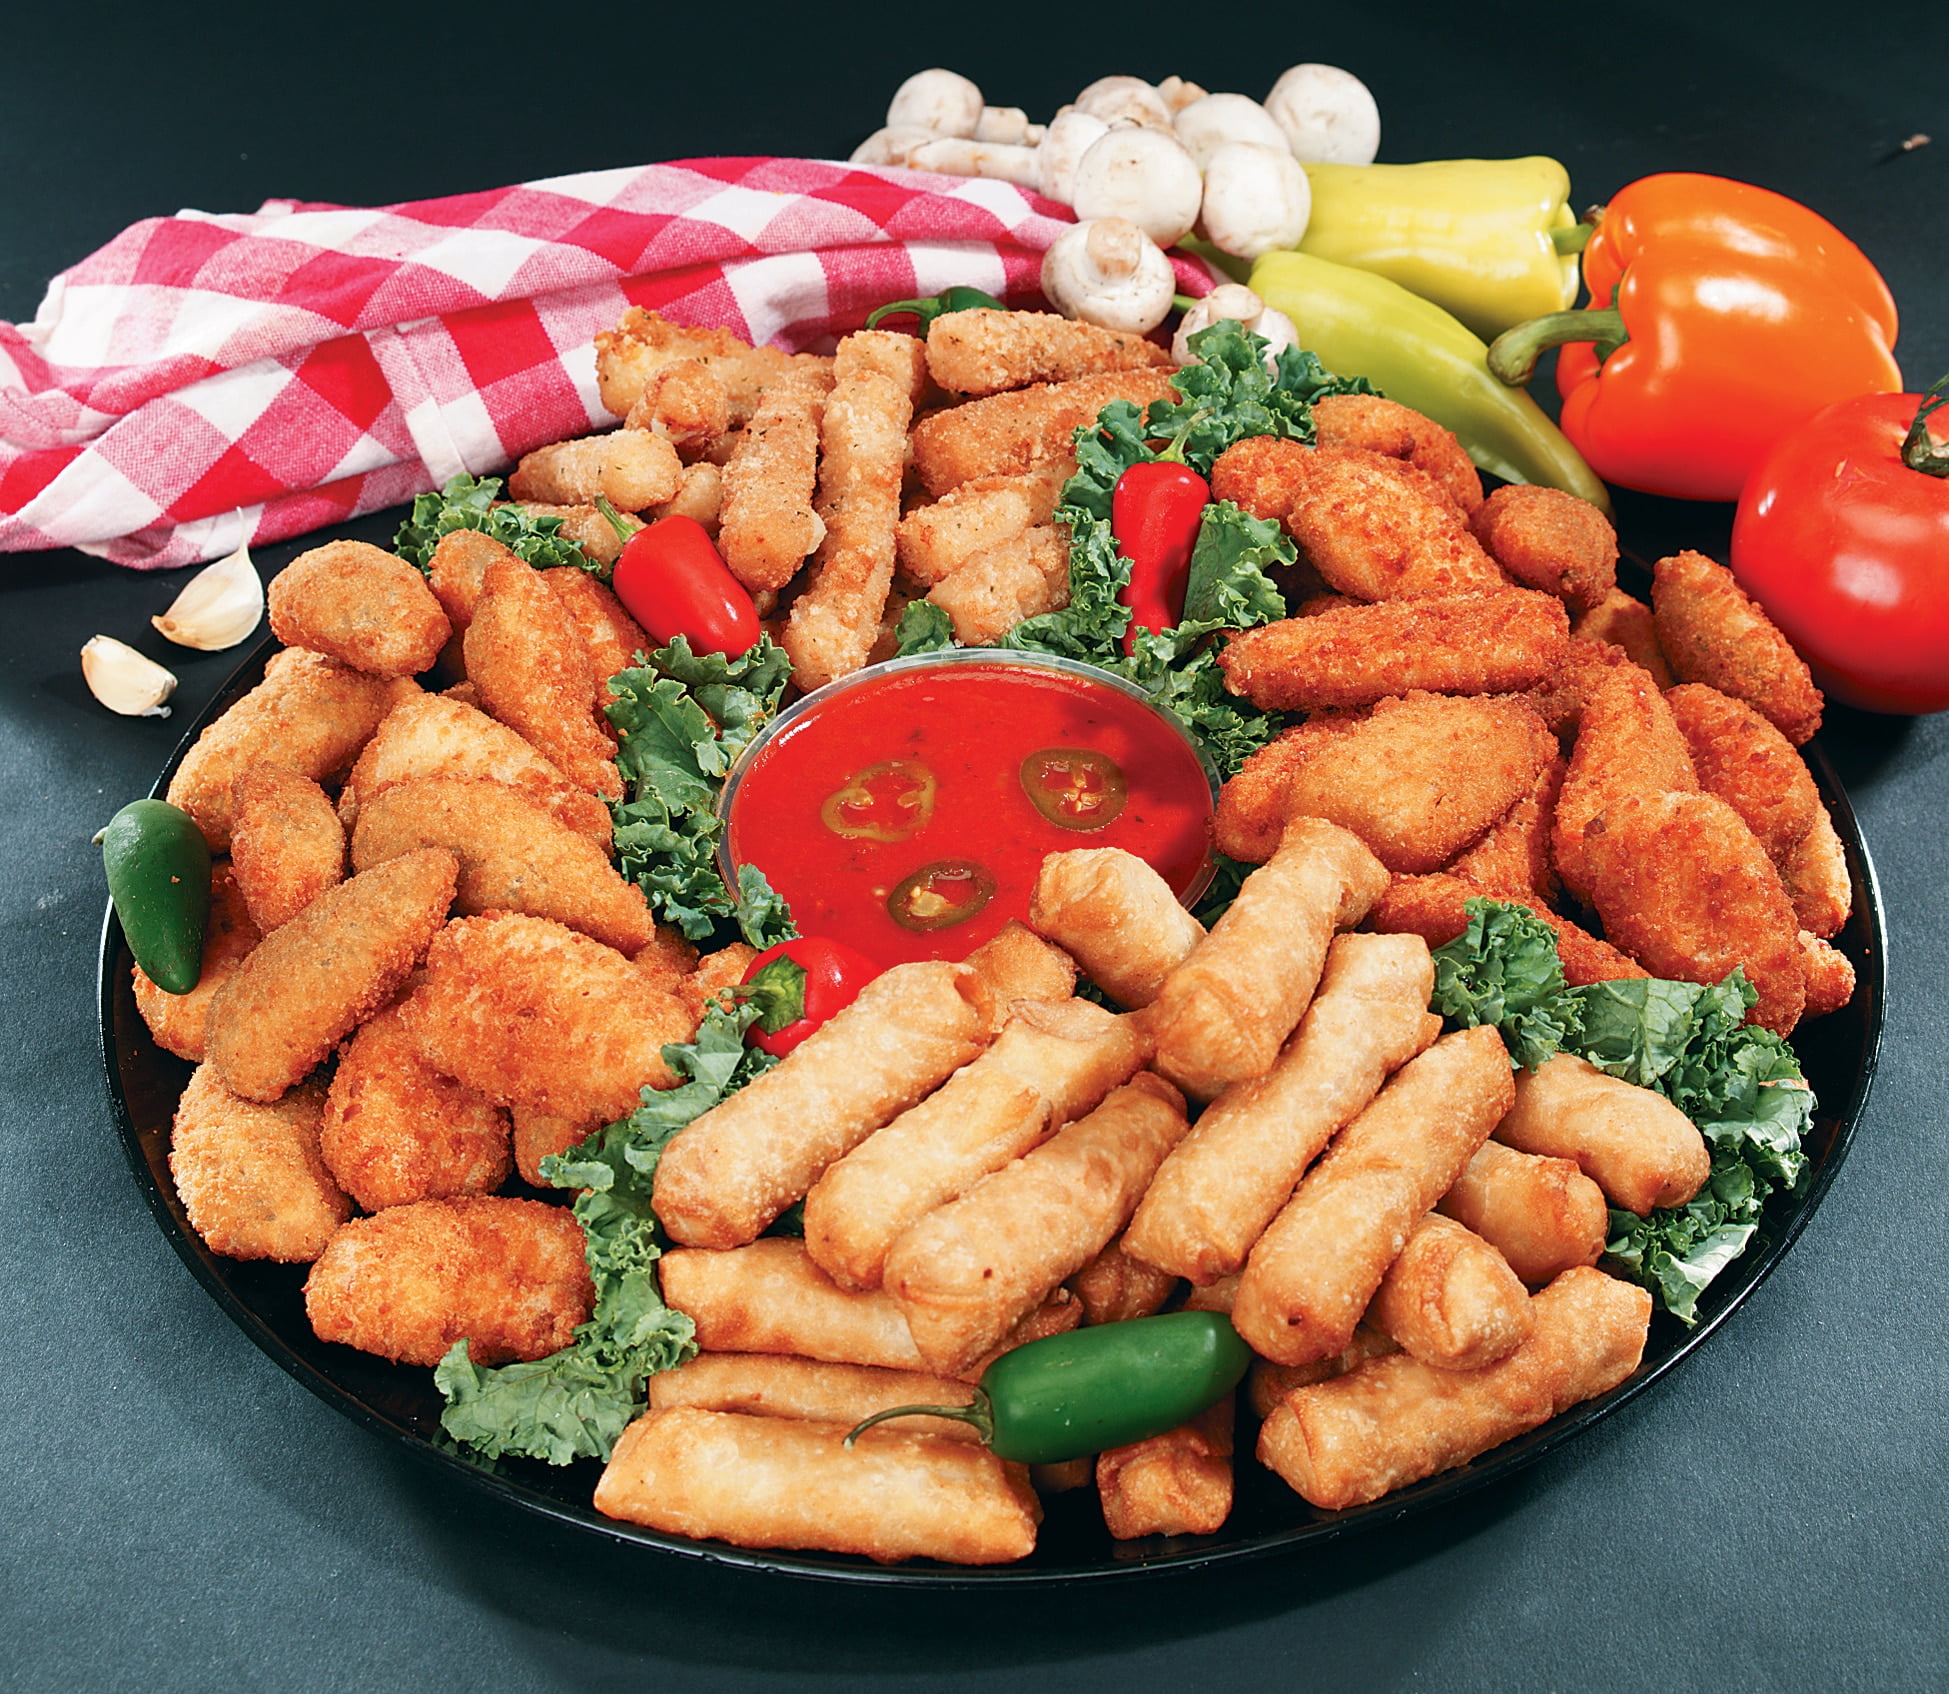 Fried Appetizer Platter Food Picture